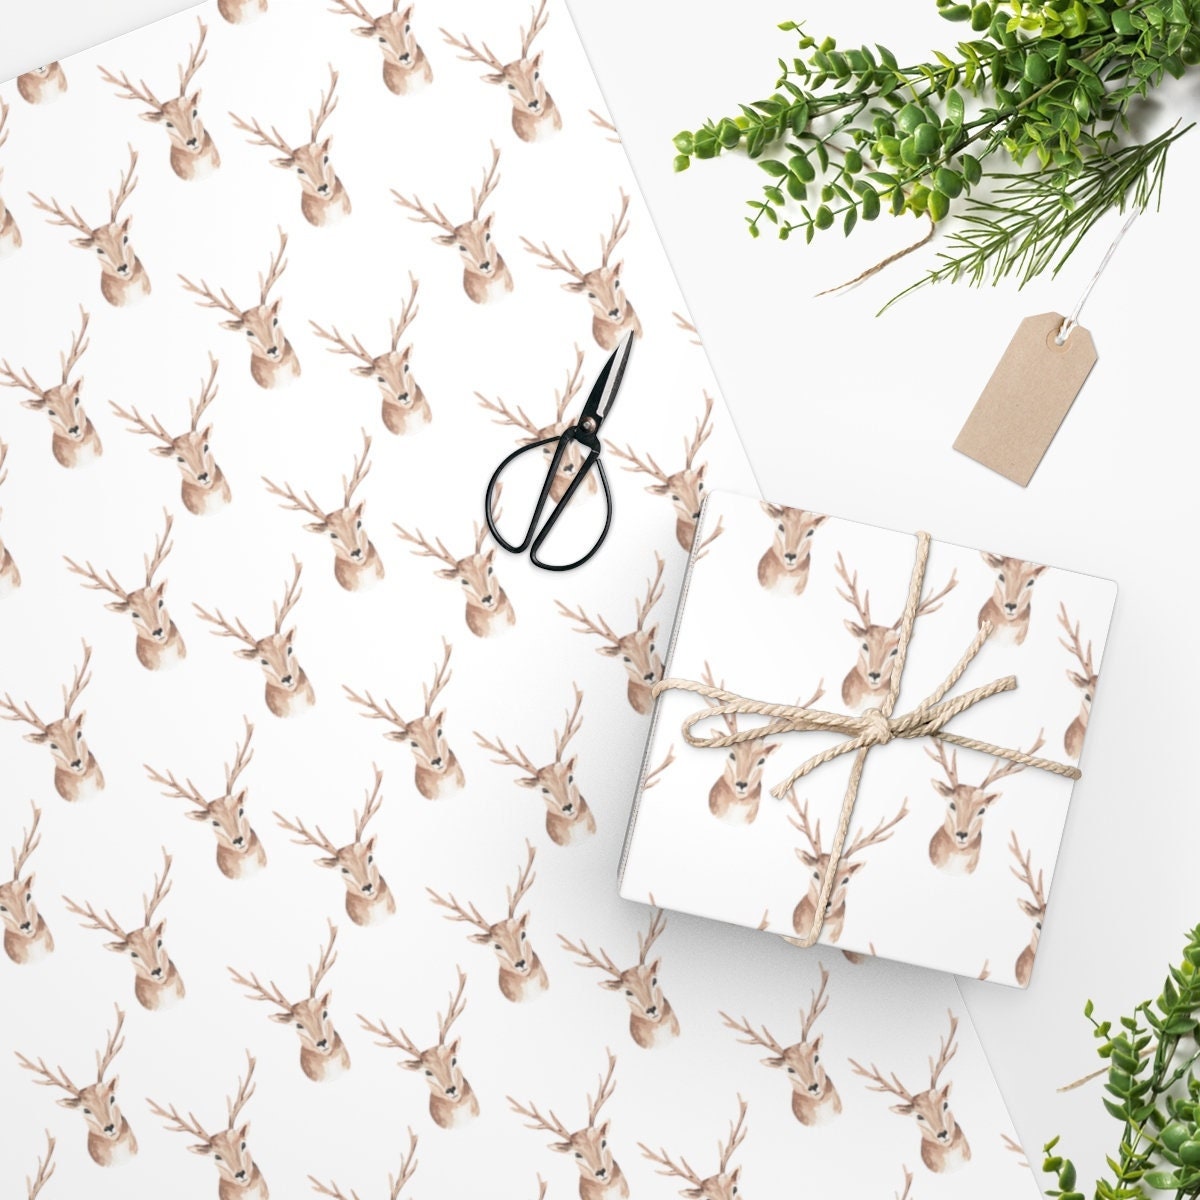 Woodland Deer Wrapping Paper